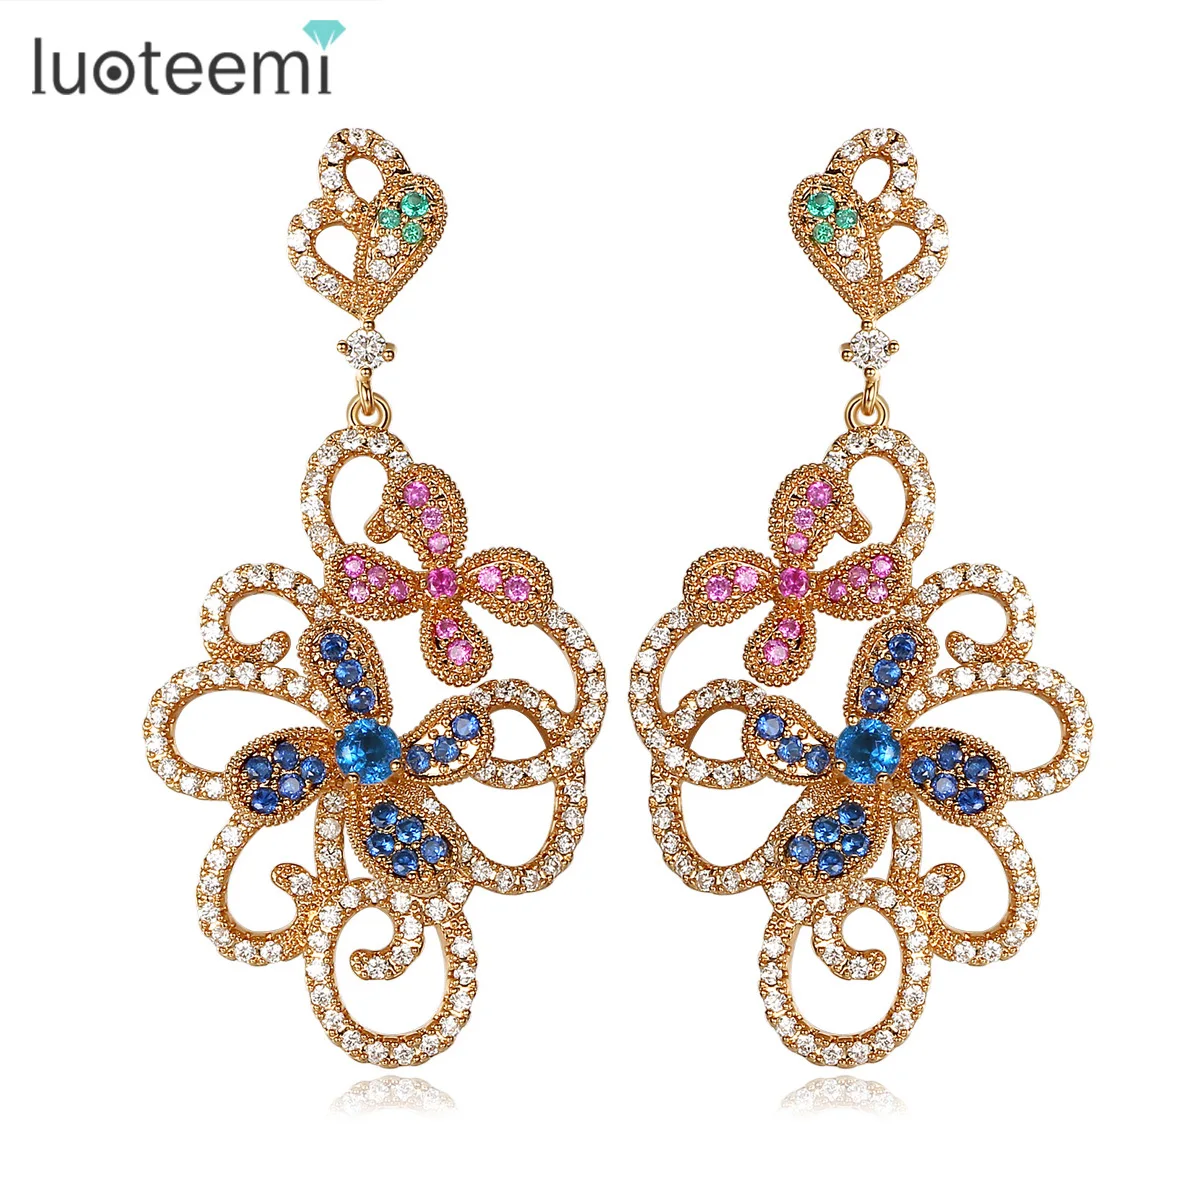 

LUOTEEMI Chanpanged Gold / White Gold-Color Vintage Big Flower Drop Earrings Micro Paved Cubic Zircon Bridesmaid Wedding Women